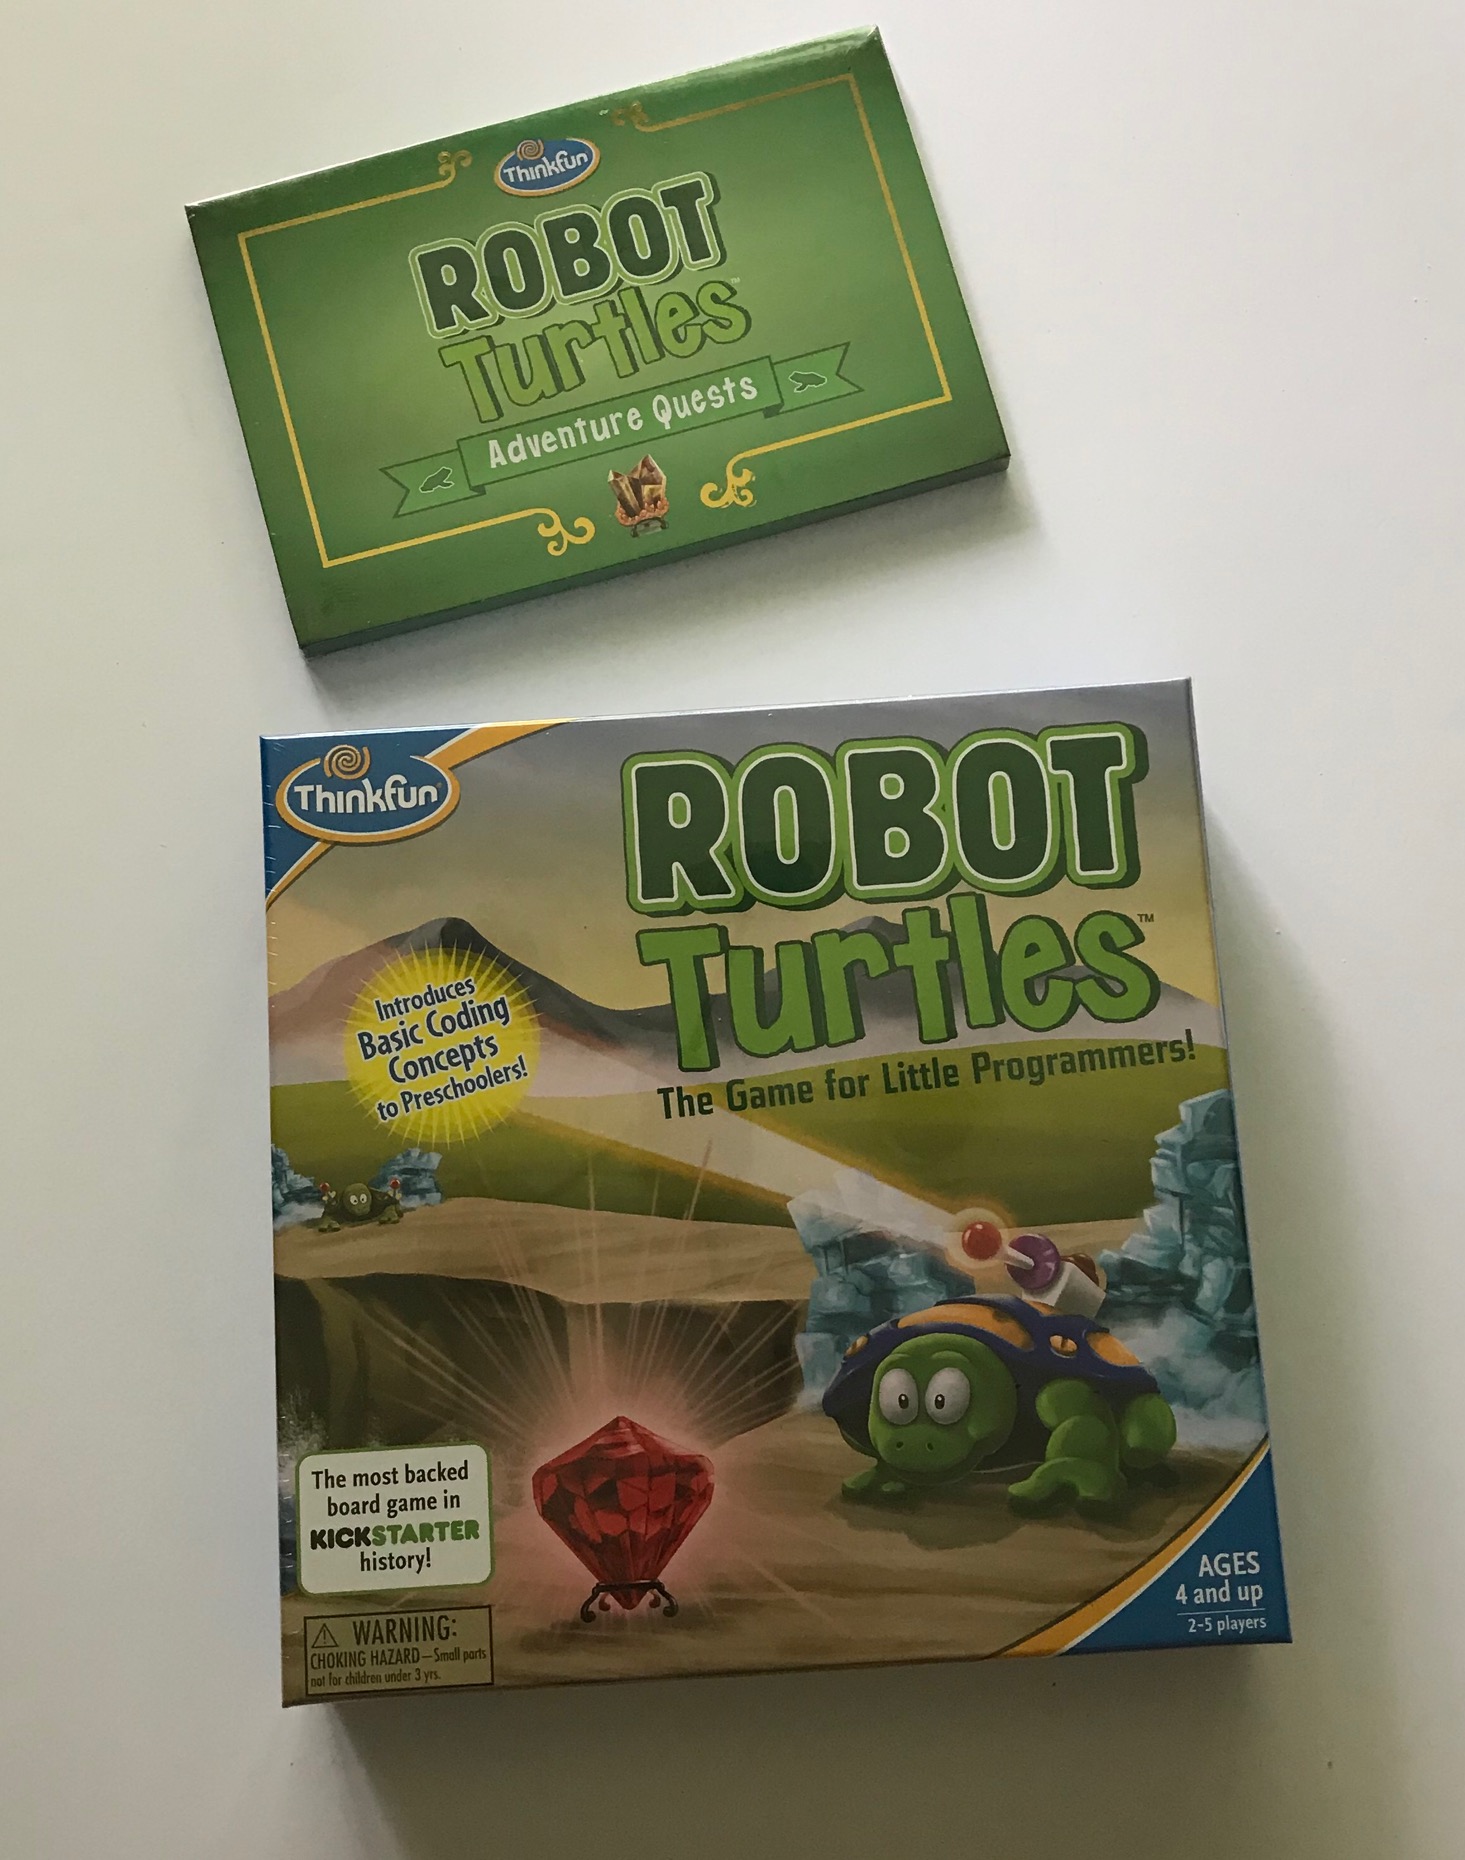 Amazon STEM Toy Club Review, Ages 5 to 7 – July 2018